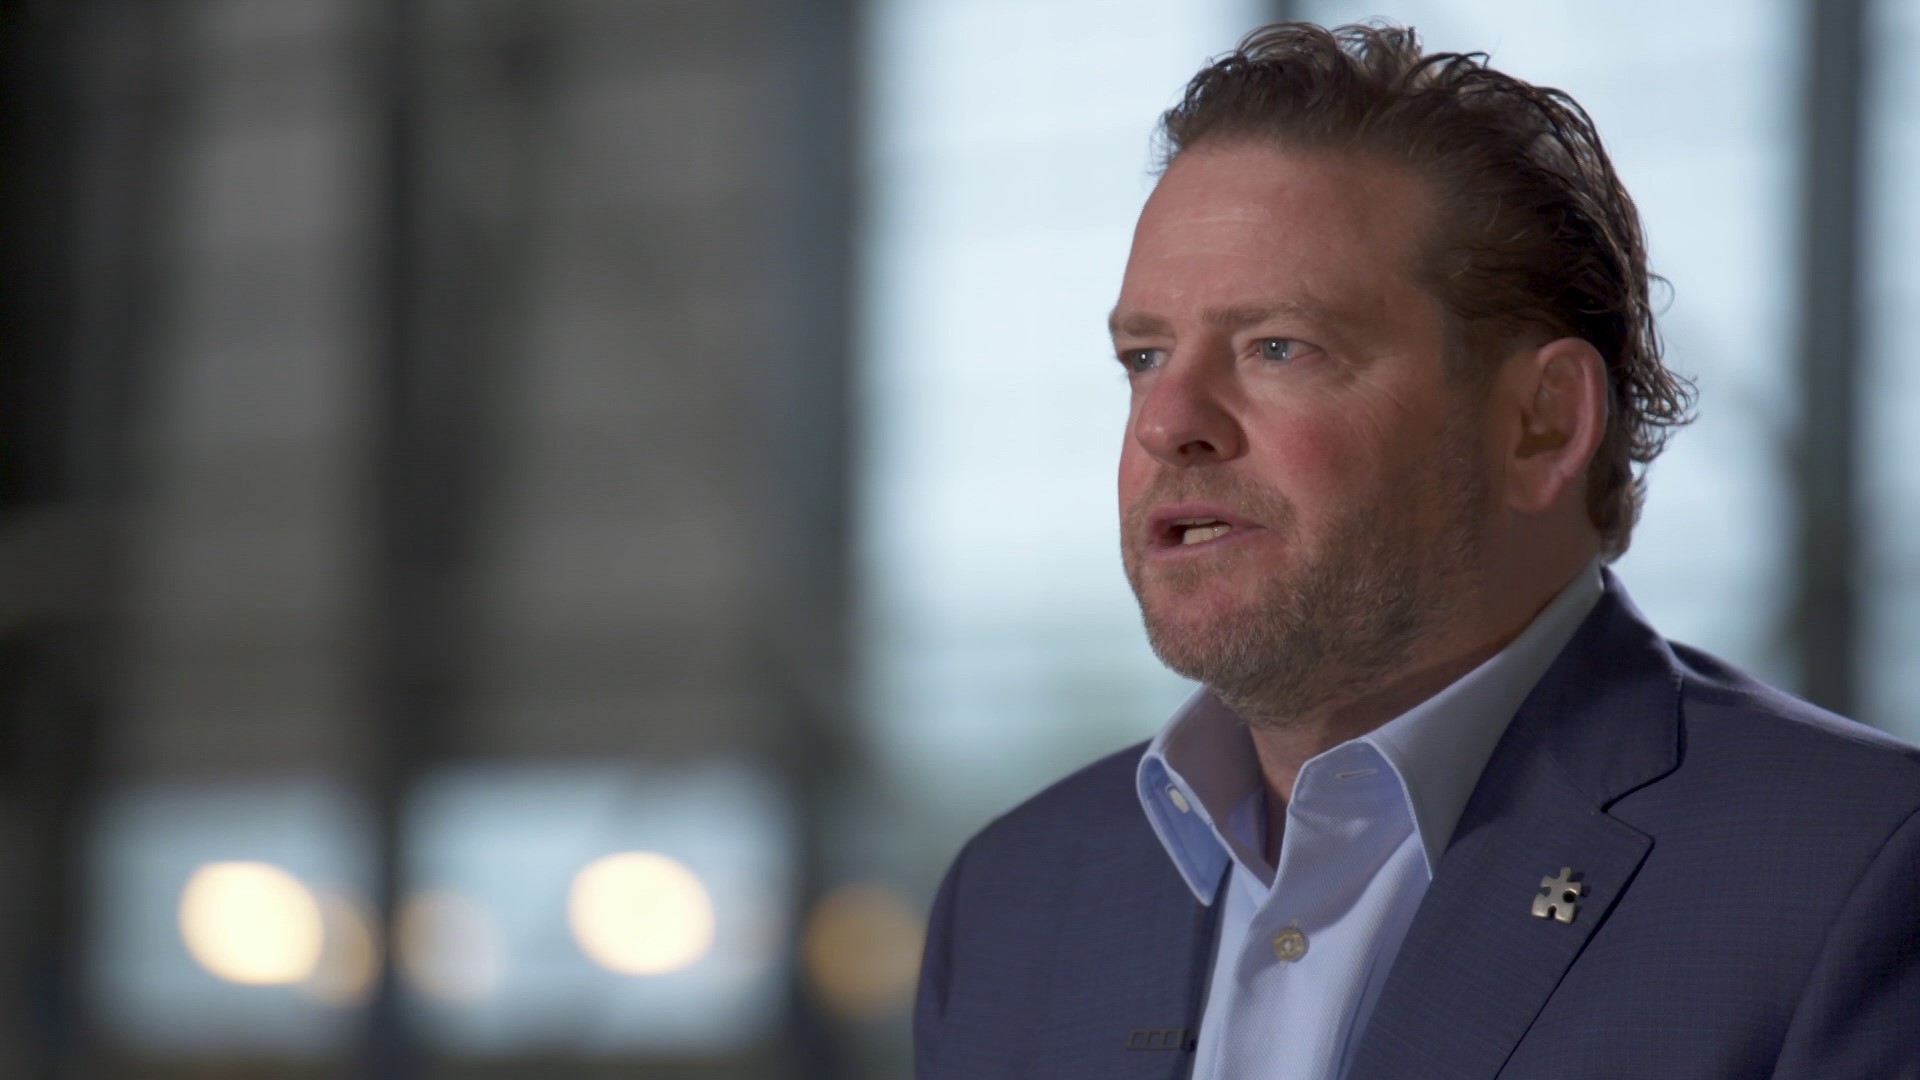 John Schneider sat down with KING 5's Paul Silvi in a one-on-one interview after Mike Macdonald was officially announced as the Seahawks head coach.